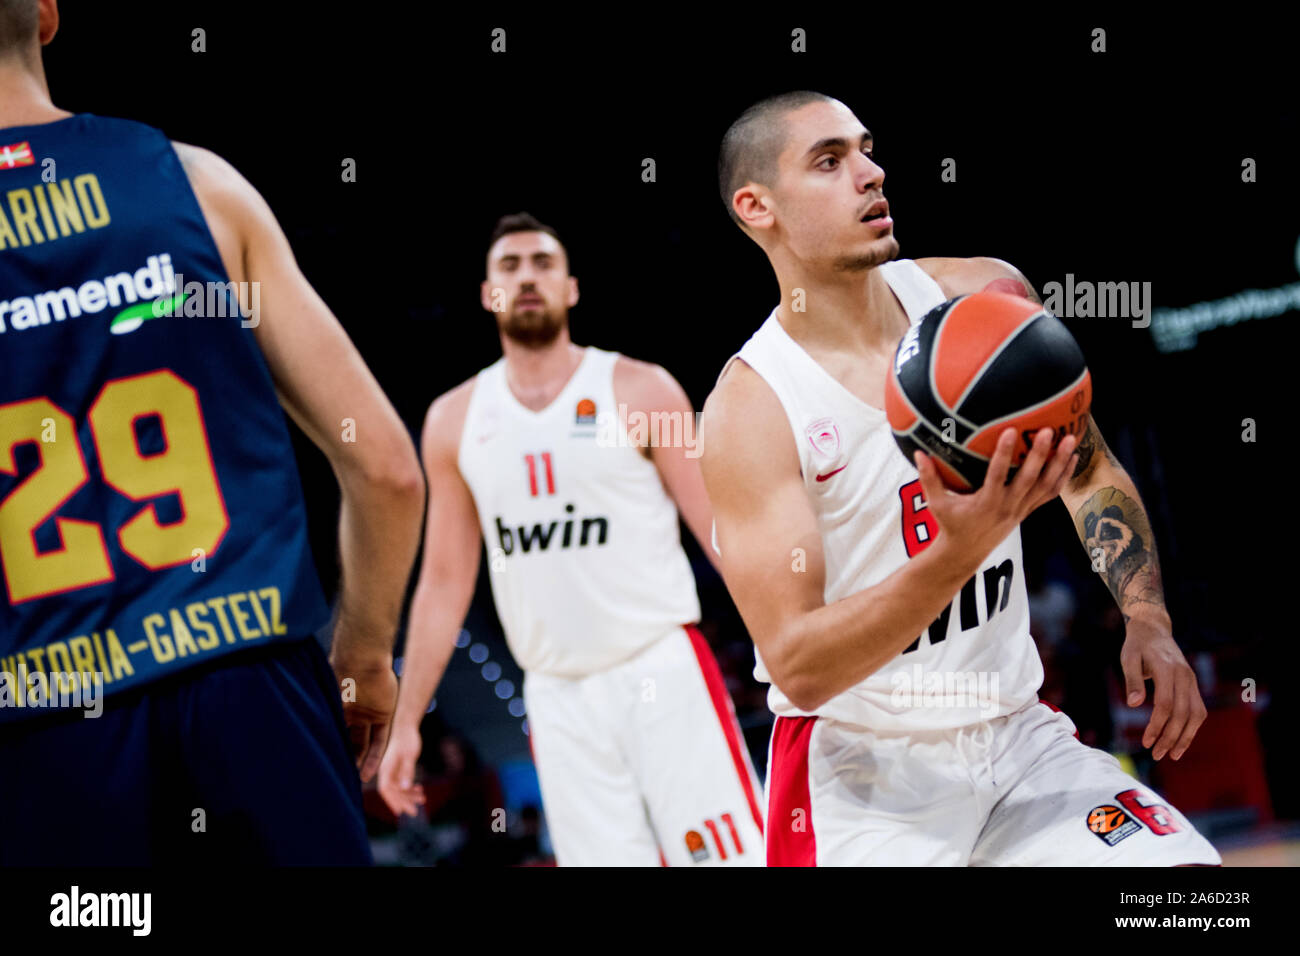 Vitoria, Spain. 25th October, 2019. Antonis Koniaris (Olympiacos) controls  the ball during the basketball match of Season 2018/2019 of Turkish  Airlines EuroLeague between Saski Baskonia and BC Olympiacos at Fernando  Buesa Arena